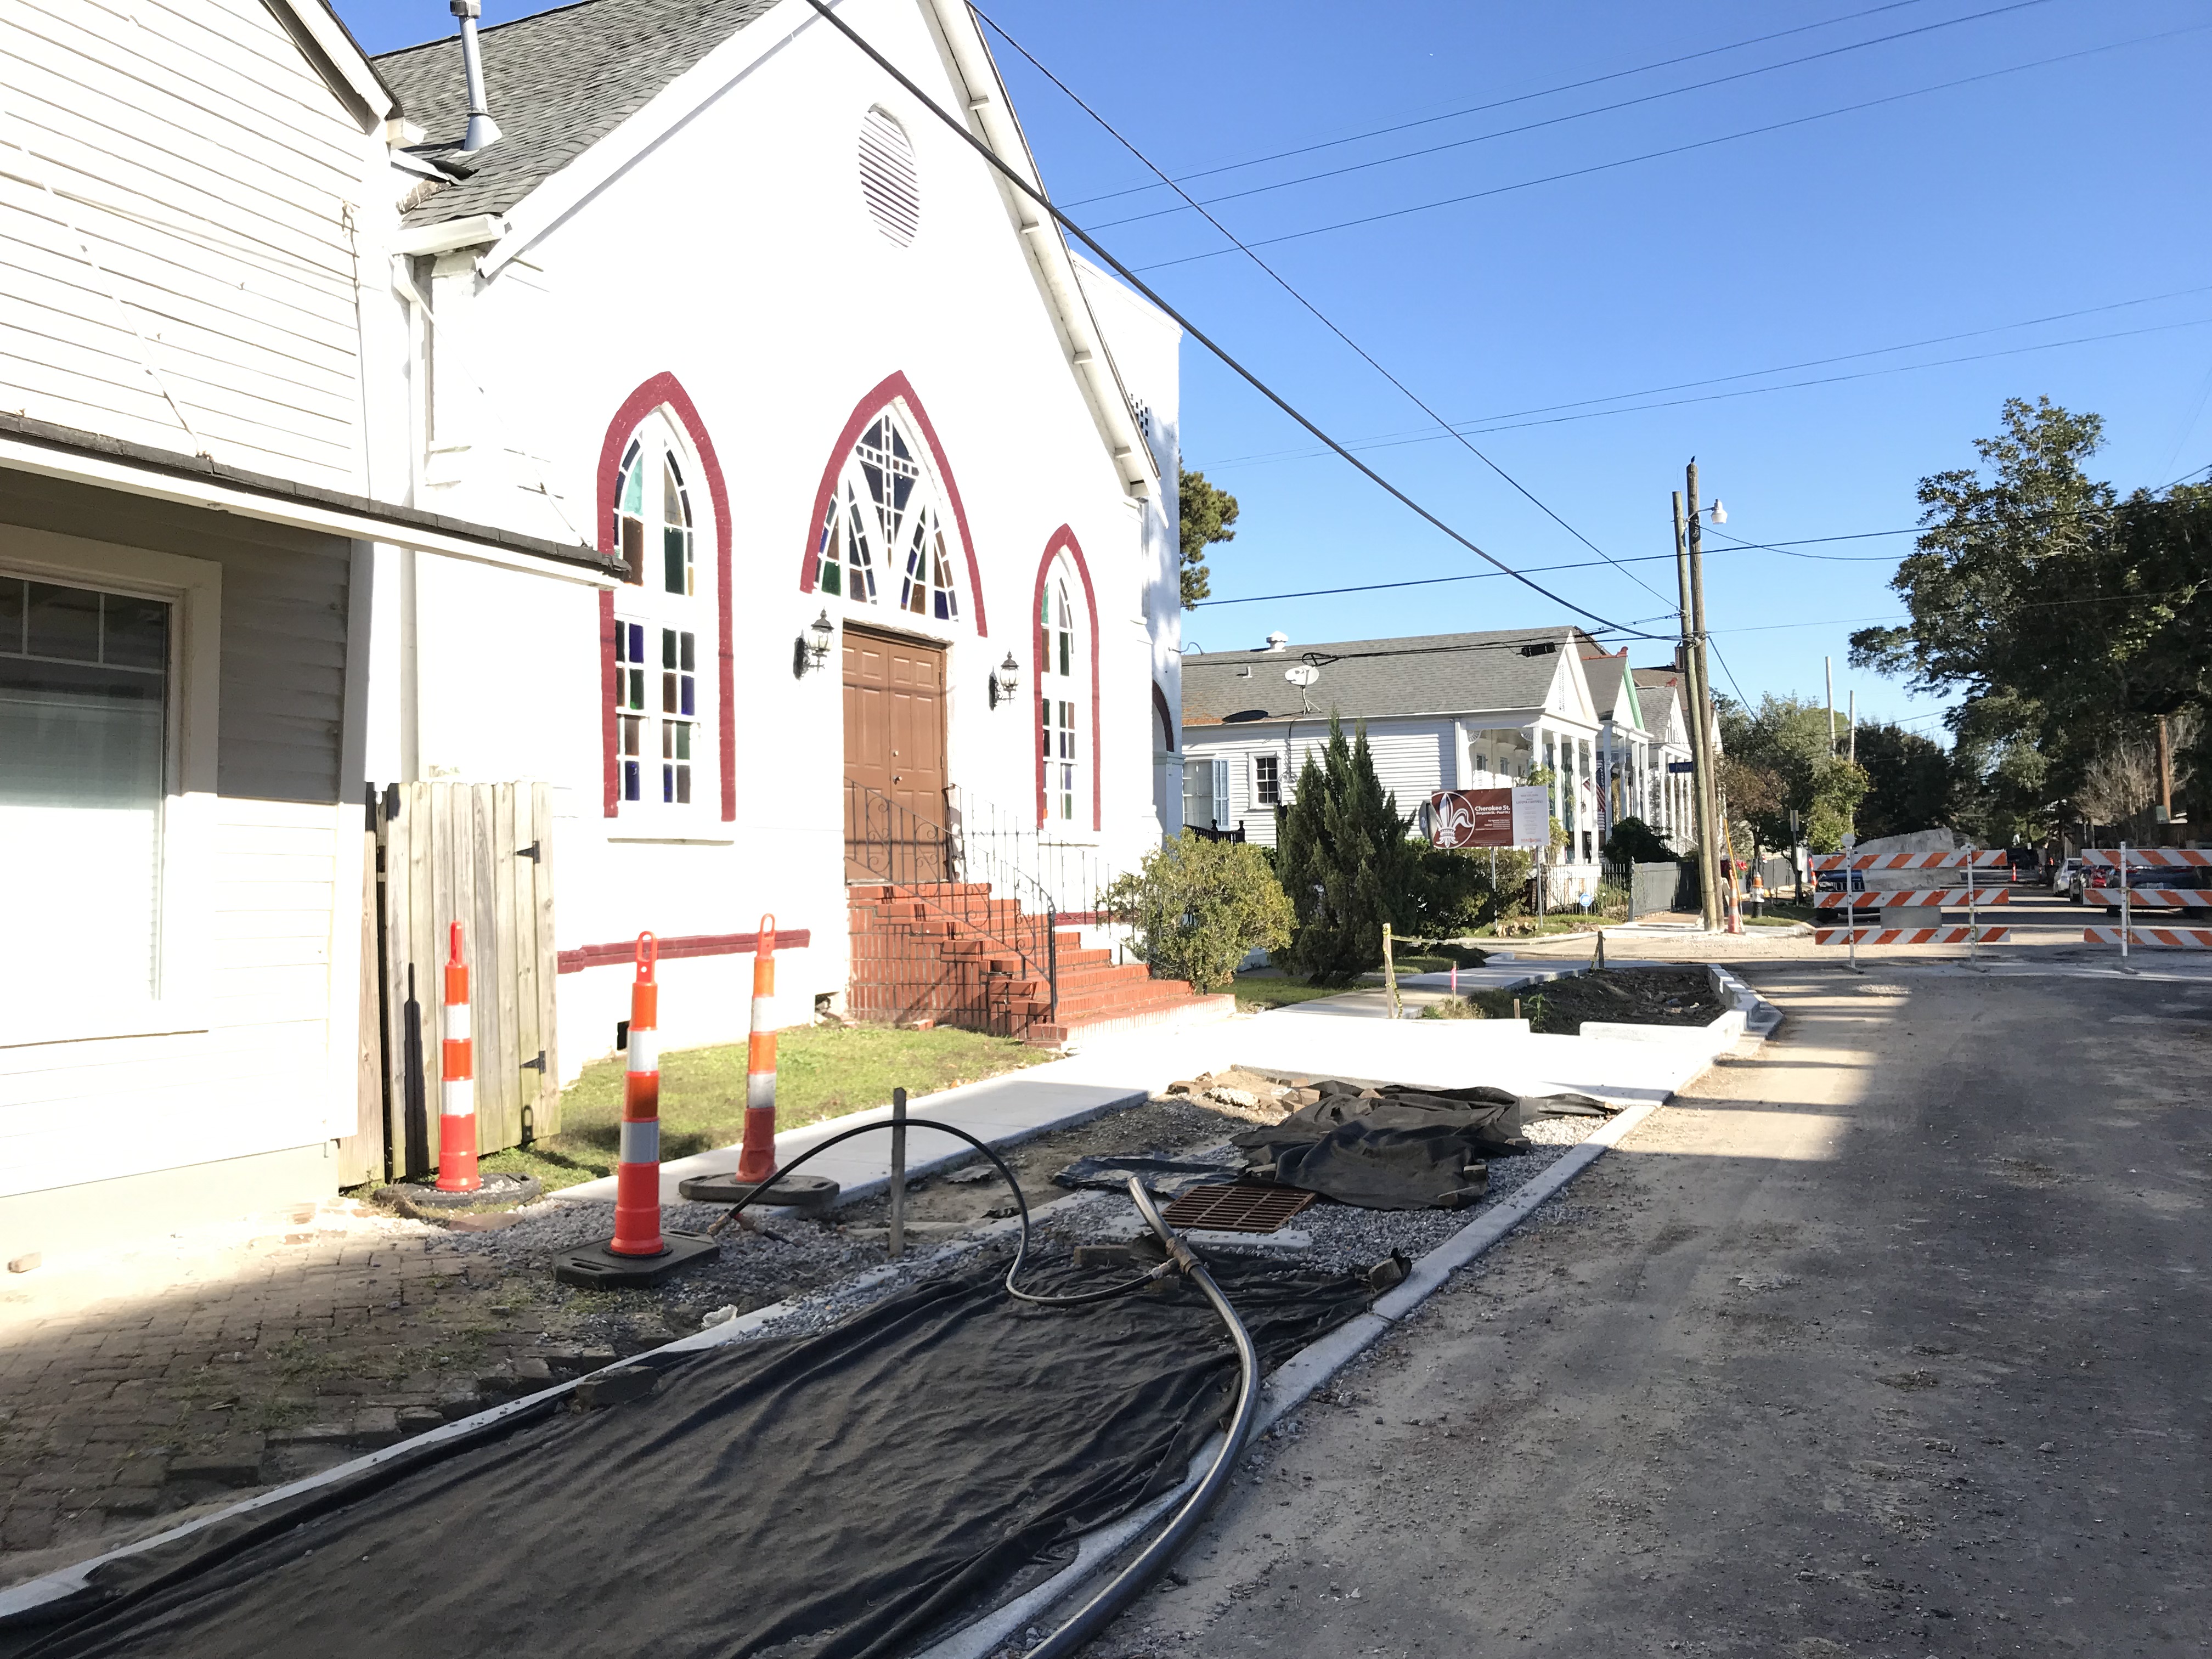 CHEROKEE STREET DRAINAGE IMPROVEMENT PROJECT NOW 72 PERCENT COMPLETE